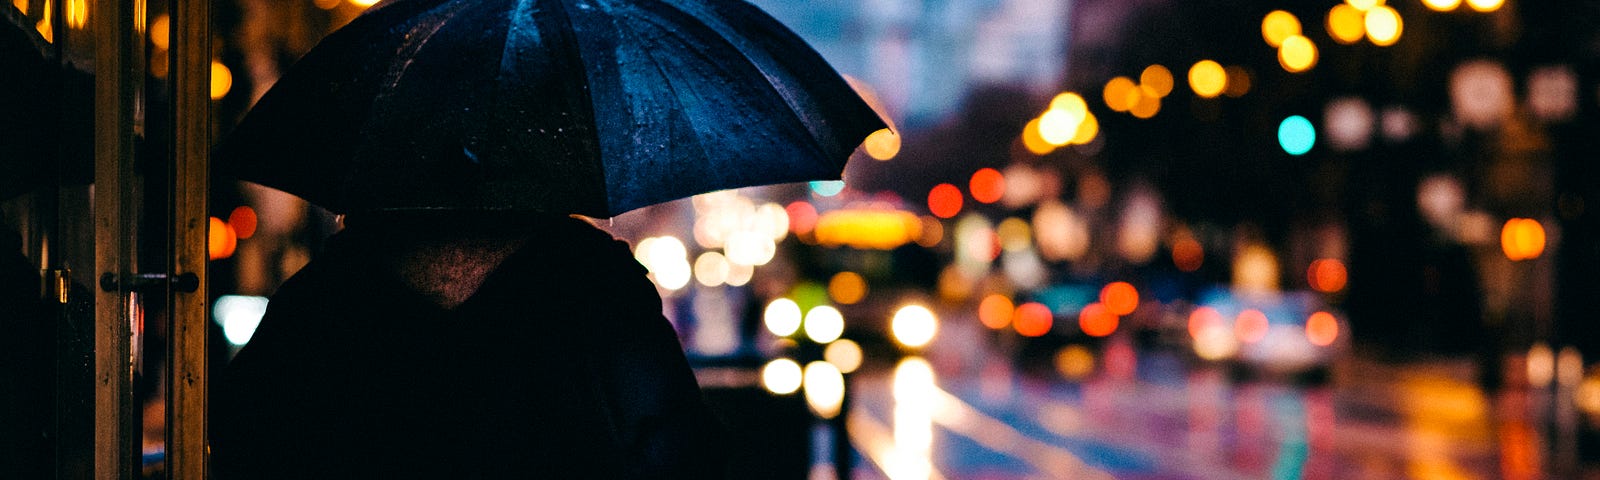 a silhouette of a person holding an umbrella in front of a rainy street with bright lights at night